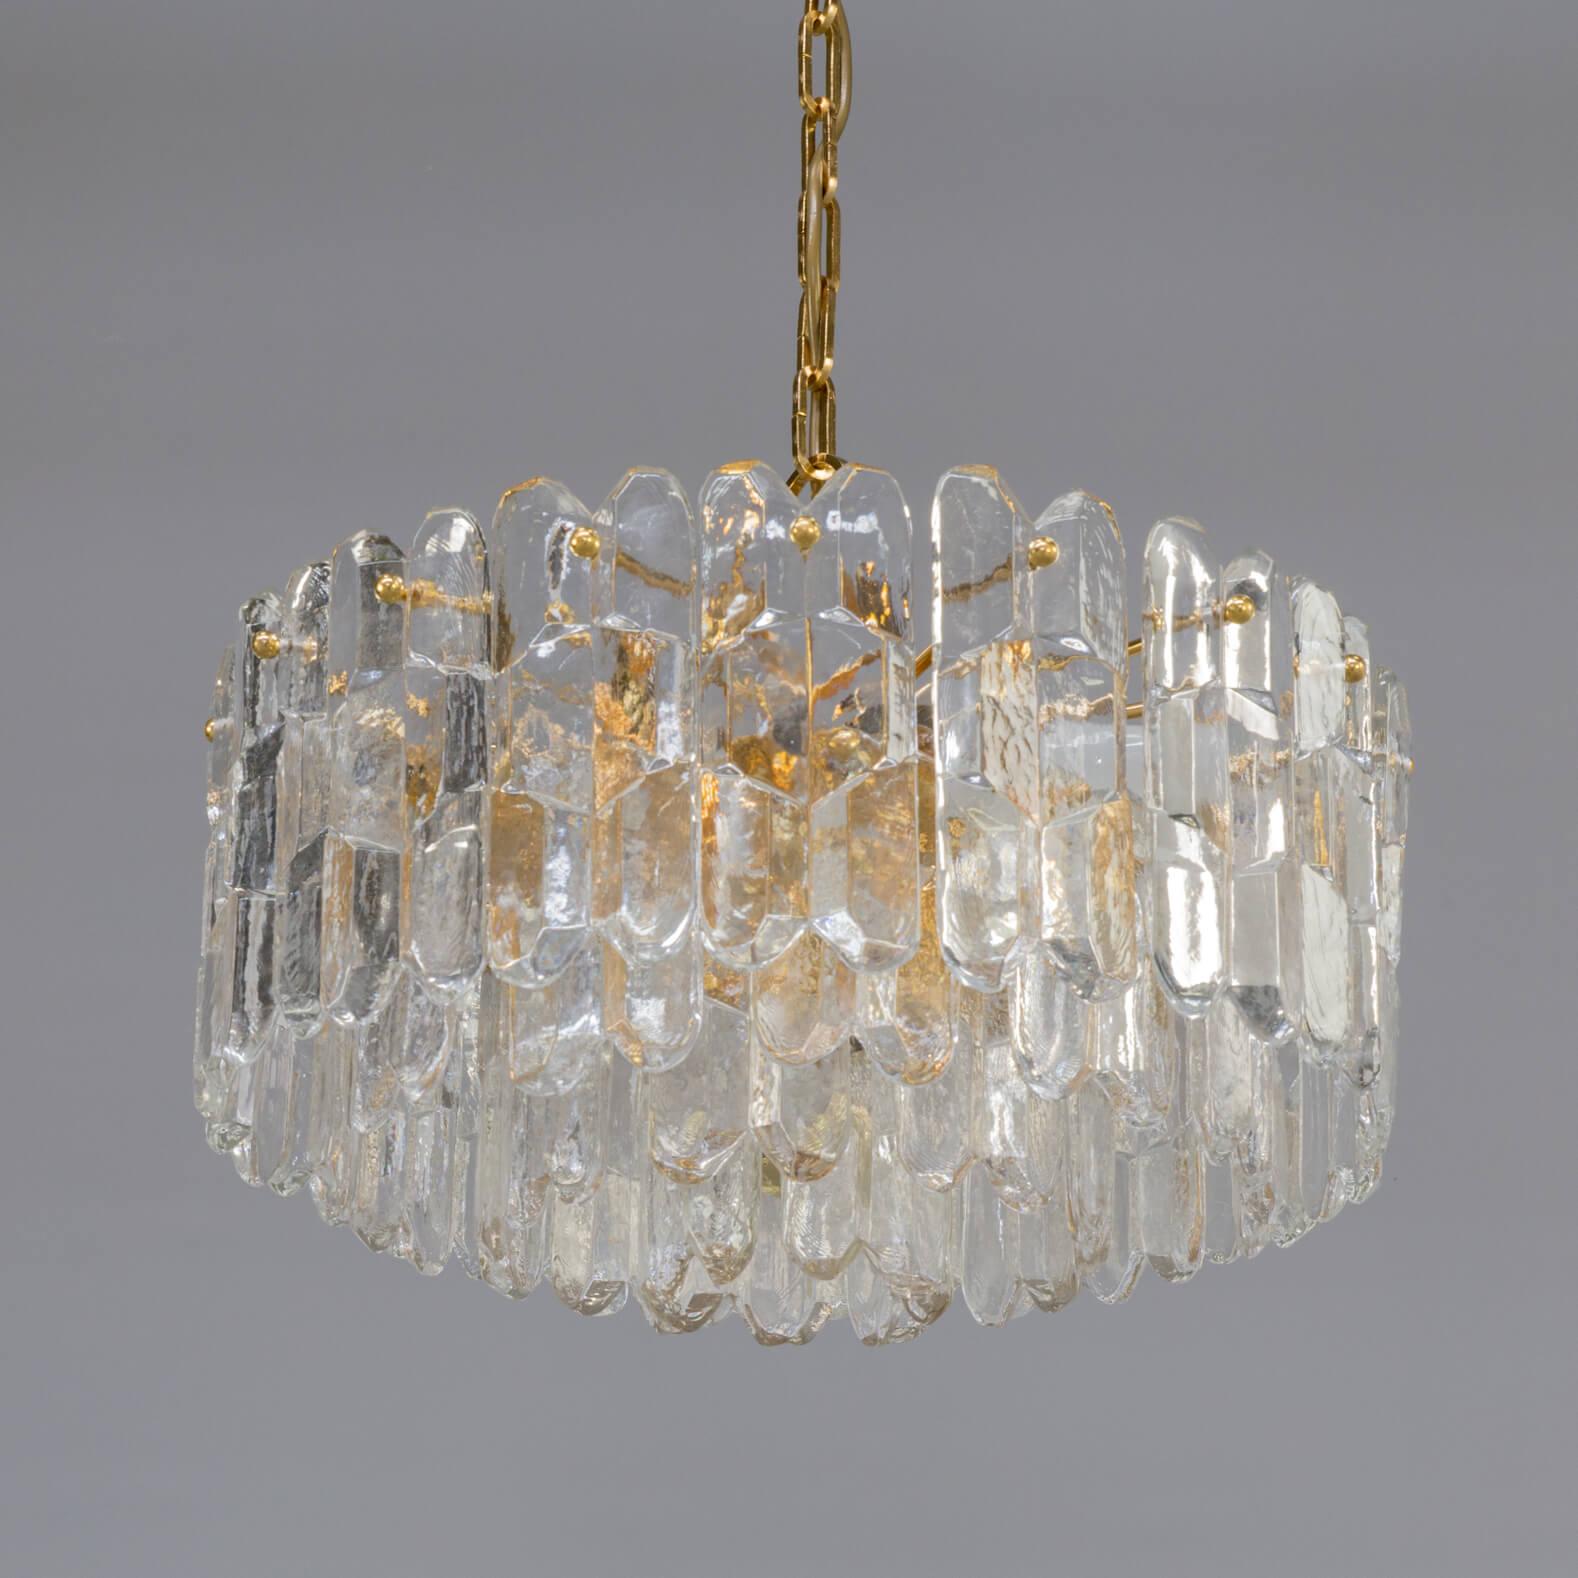 1960s J.T. Kalmar Brass and Glass Pendant Hanging Lamp for Kalmar In Good Condition For Sale In Amstelveen, Noord